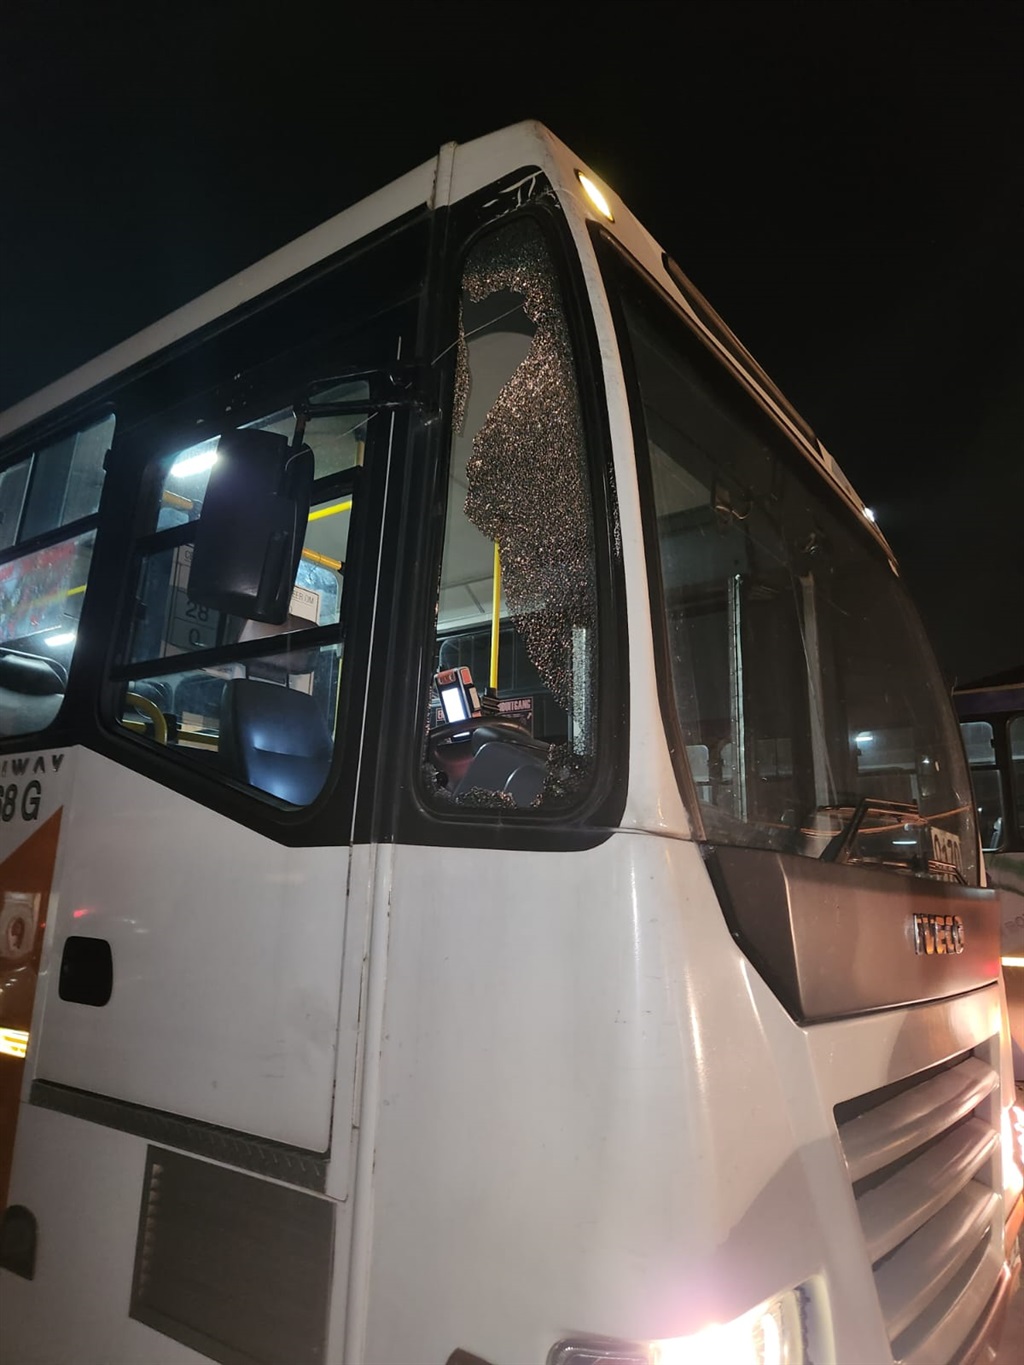 Putco bus that sustained damage after being hijack